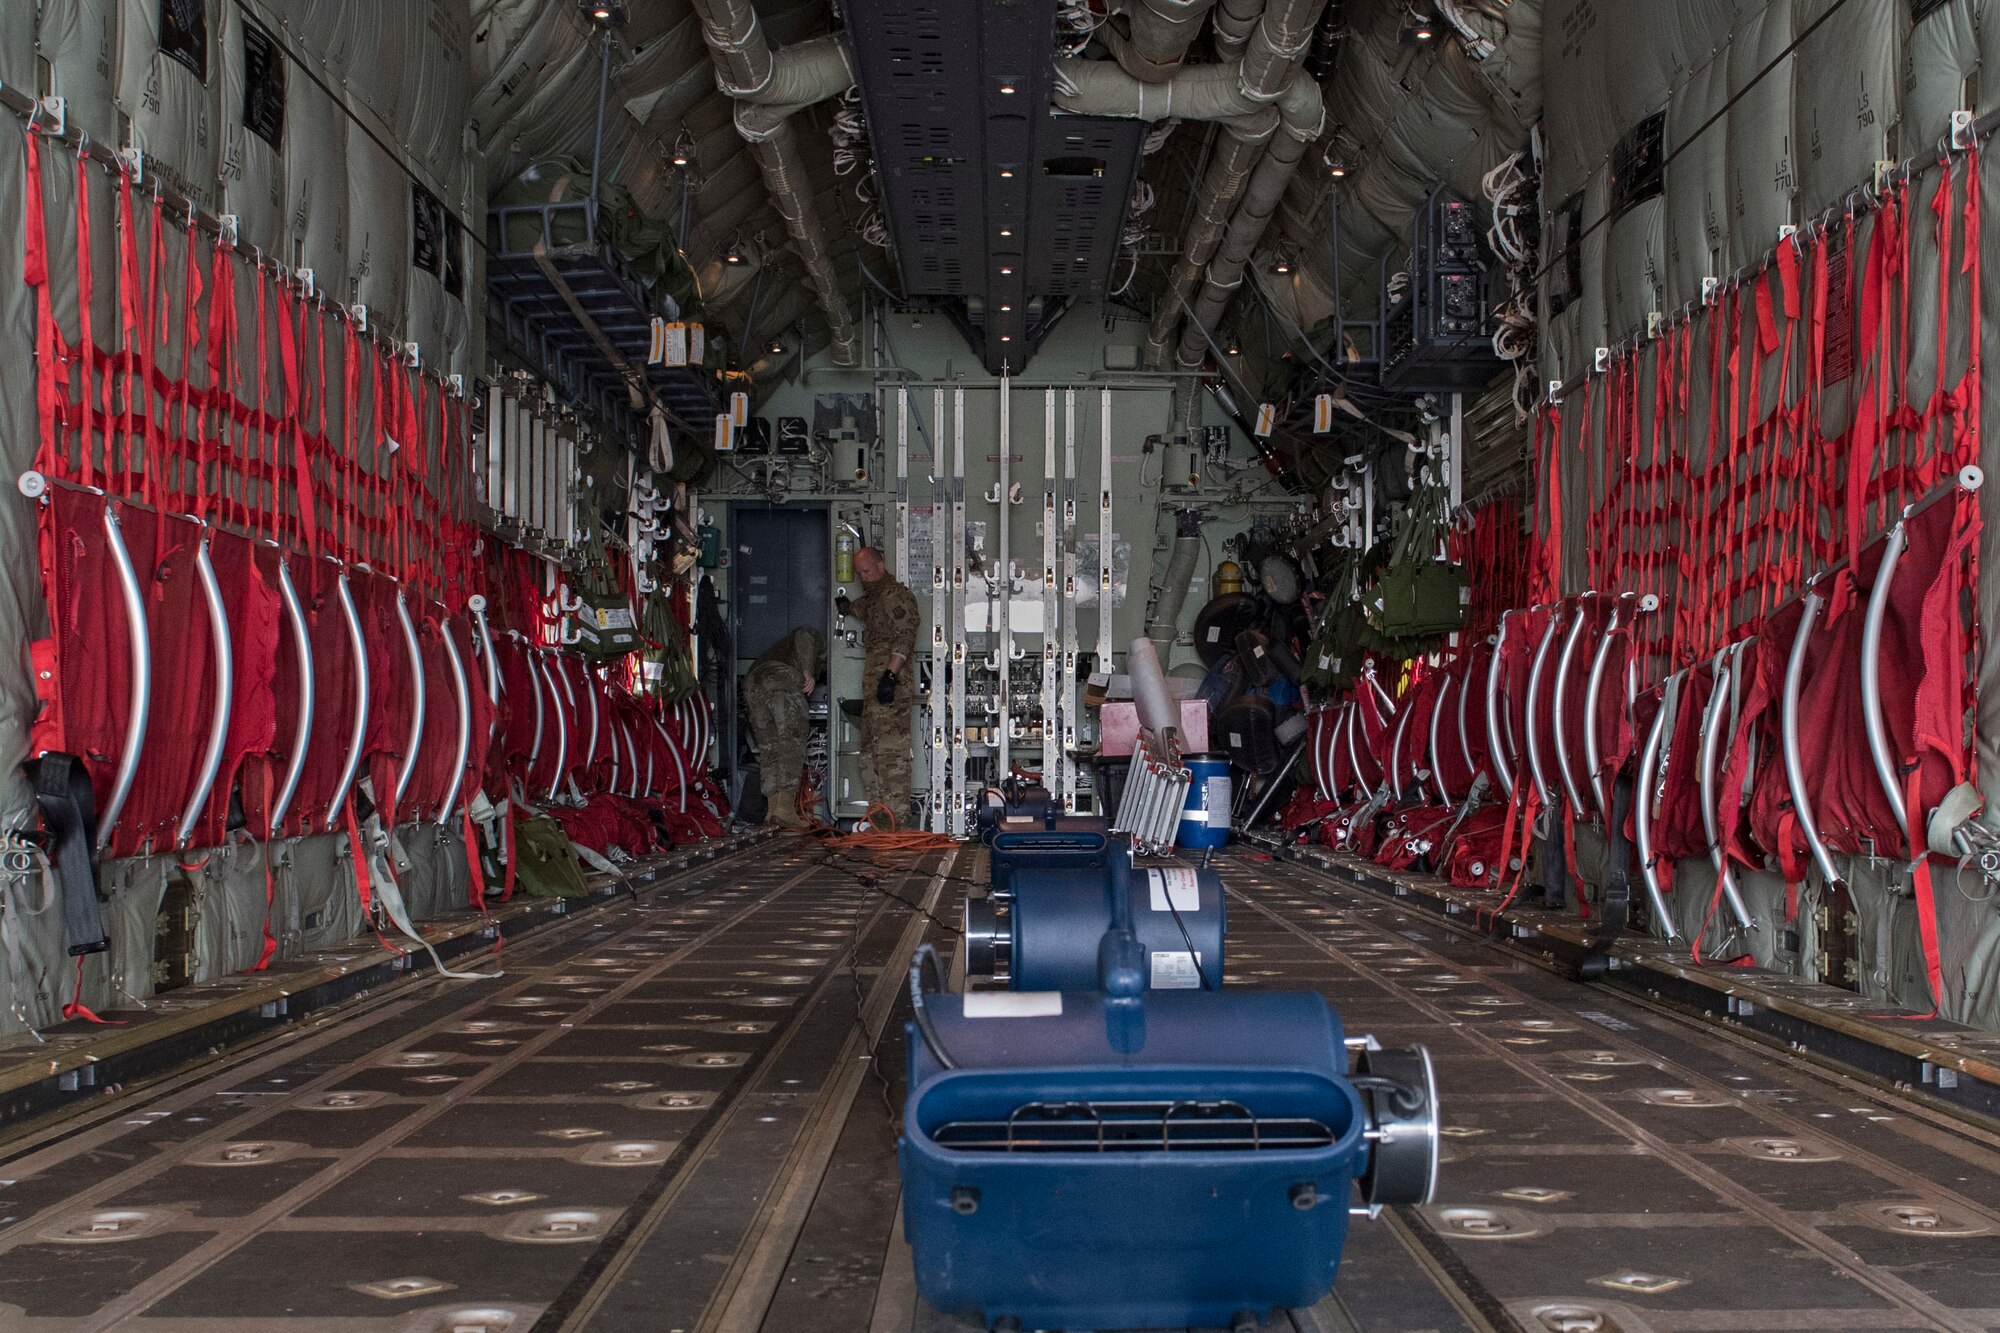 Two Airmen stand inside an aircraft next to a row of ion distribution units.